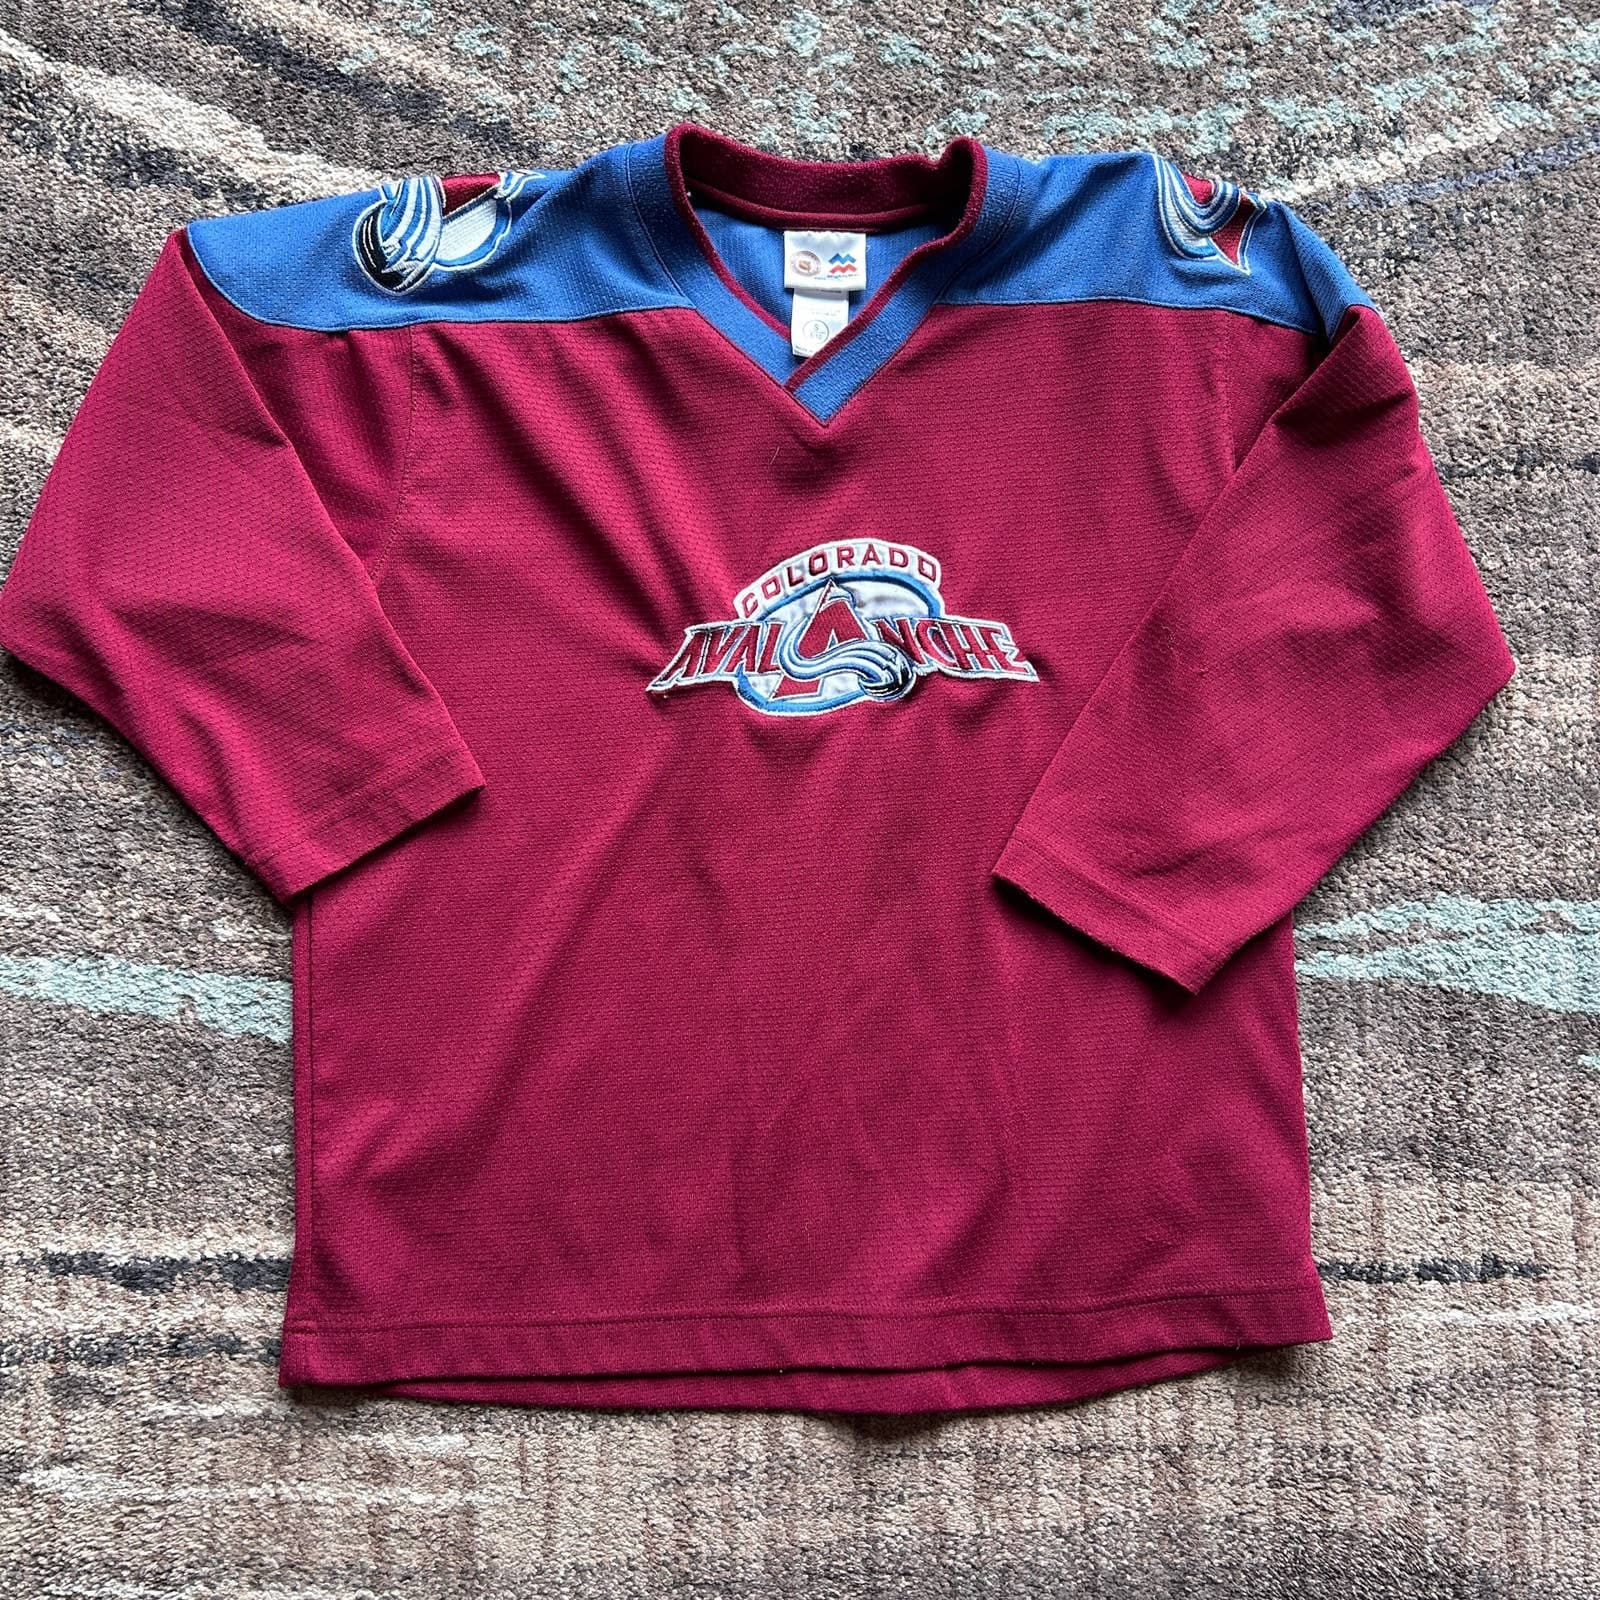 American Classic Vintage 90s Colorado Avalanche NHL Fan Jersey. Made in The USA. Tagged As A Youth Large